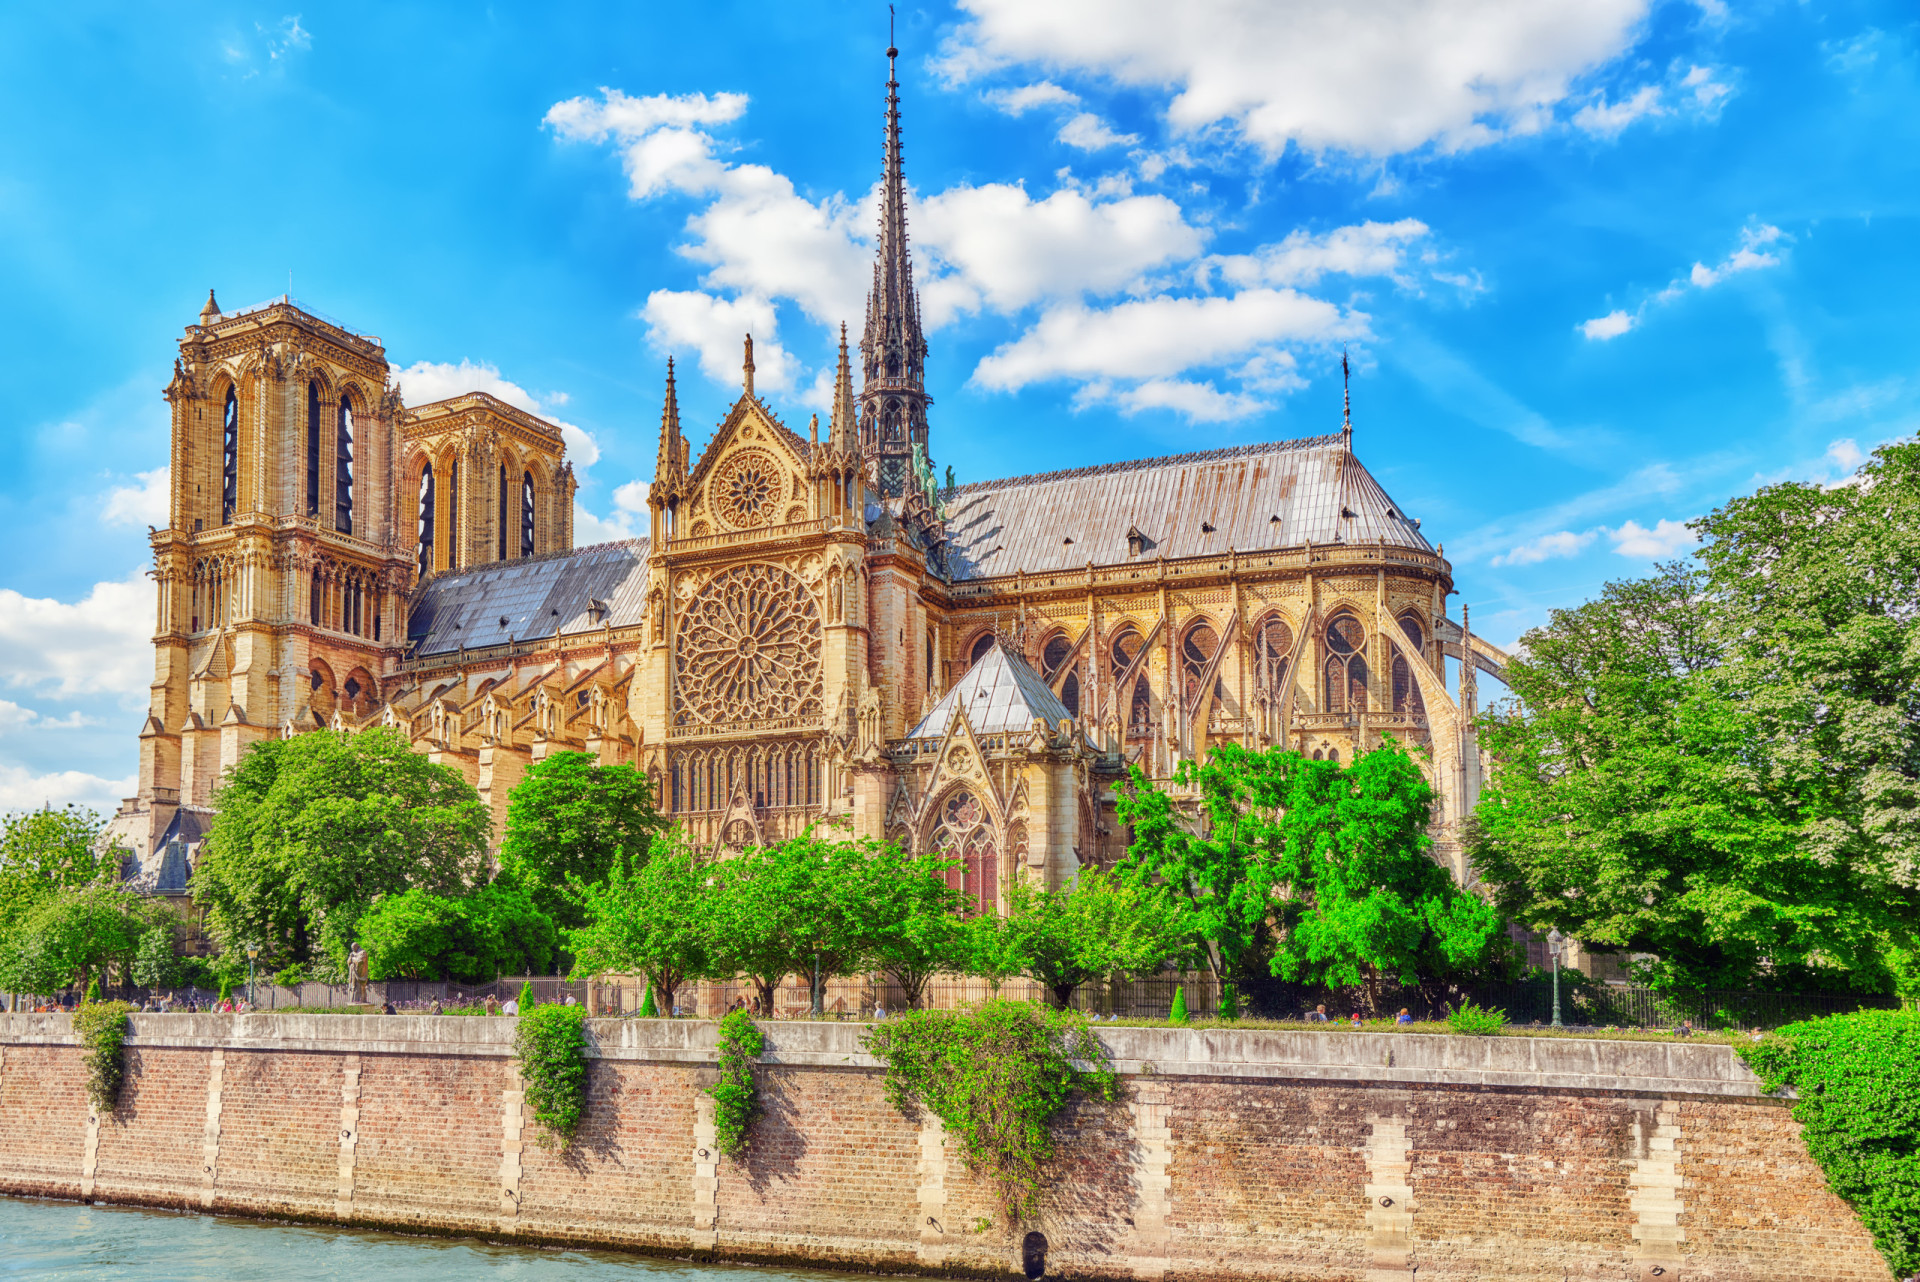 <p>Victor Hugo's 'Les Misérables' is deeply intertwined with the streets of Paris. While the tale of Jean Valjean unfolds against the backdrop of 19th-century Paris, visitors today can explore iconic sites like the Notre Dame Cathedral.</p><p><a href="https://www.msn.com/en-us/community/channel/vid-7xx8mnucu55yw63we9va2gwr7uihbxwc68fxqp25x6tg4ftibpra?cvid=94631541bc0f4f89bfd59158d696ad7e">Follow us and access great exclusive content every day</a></p>